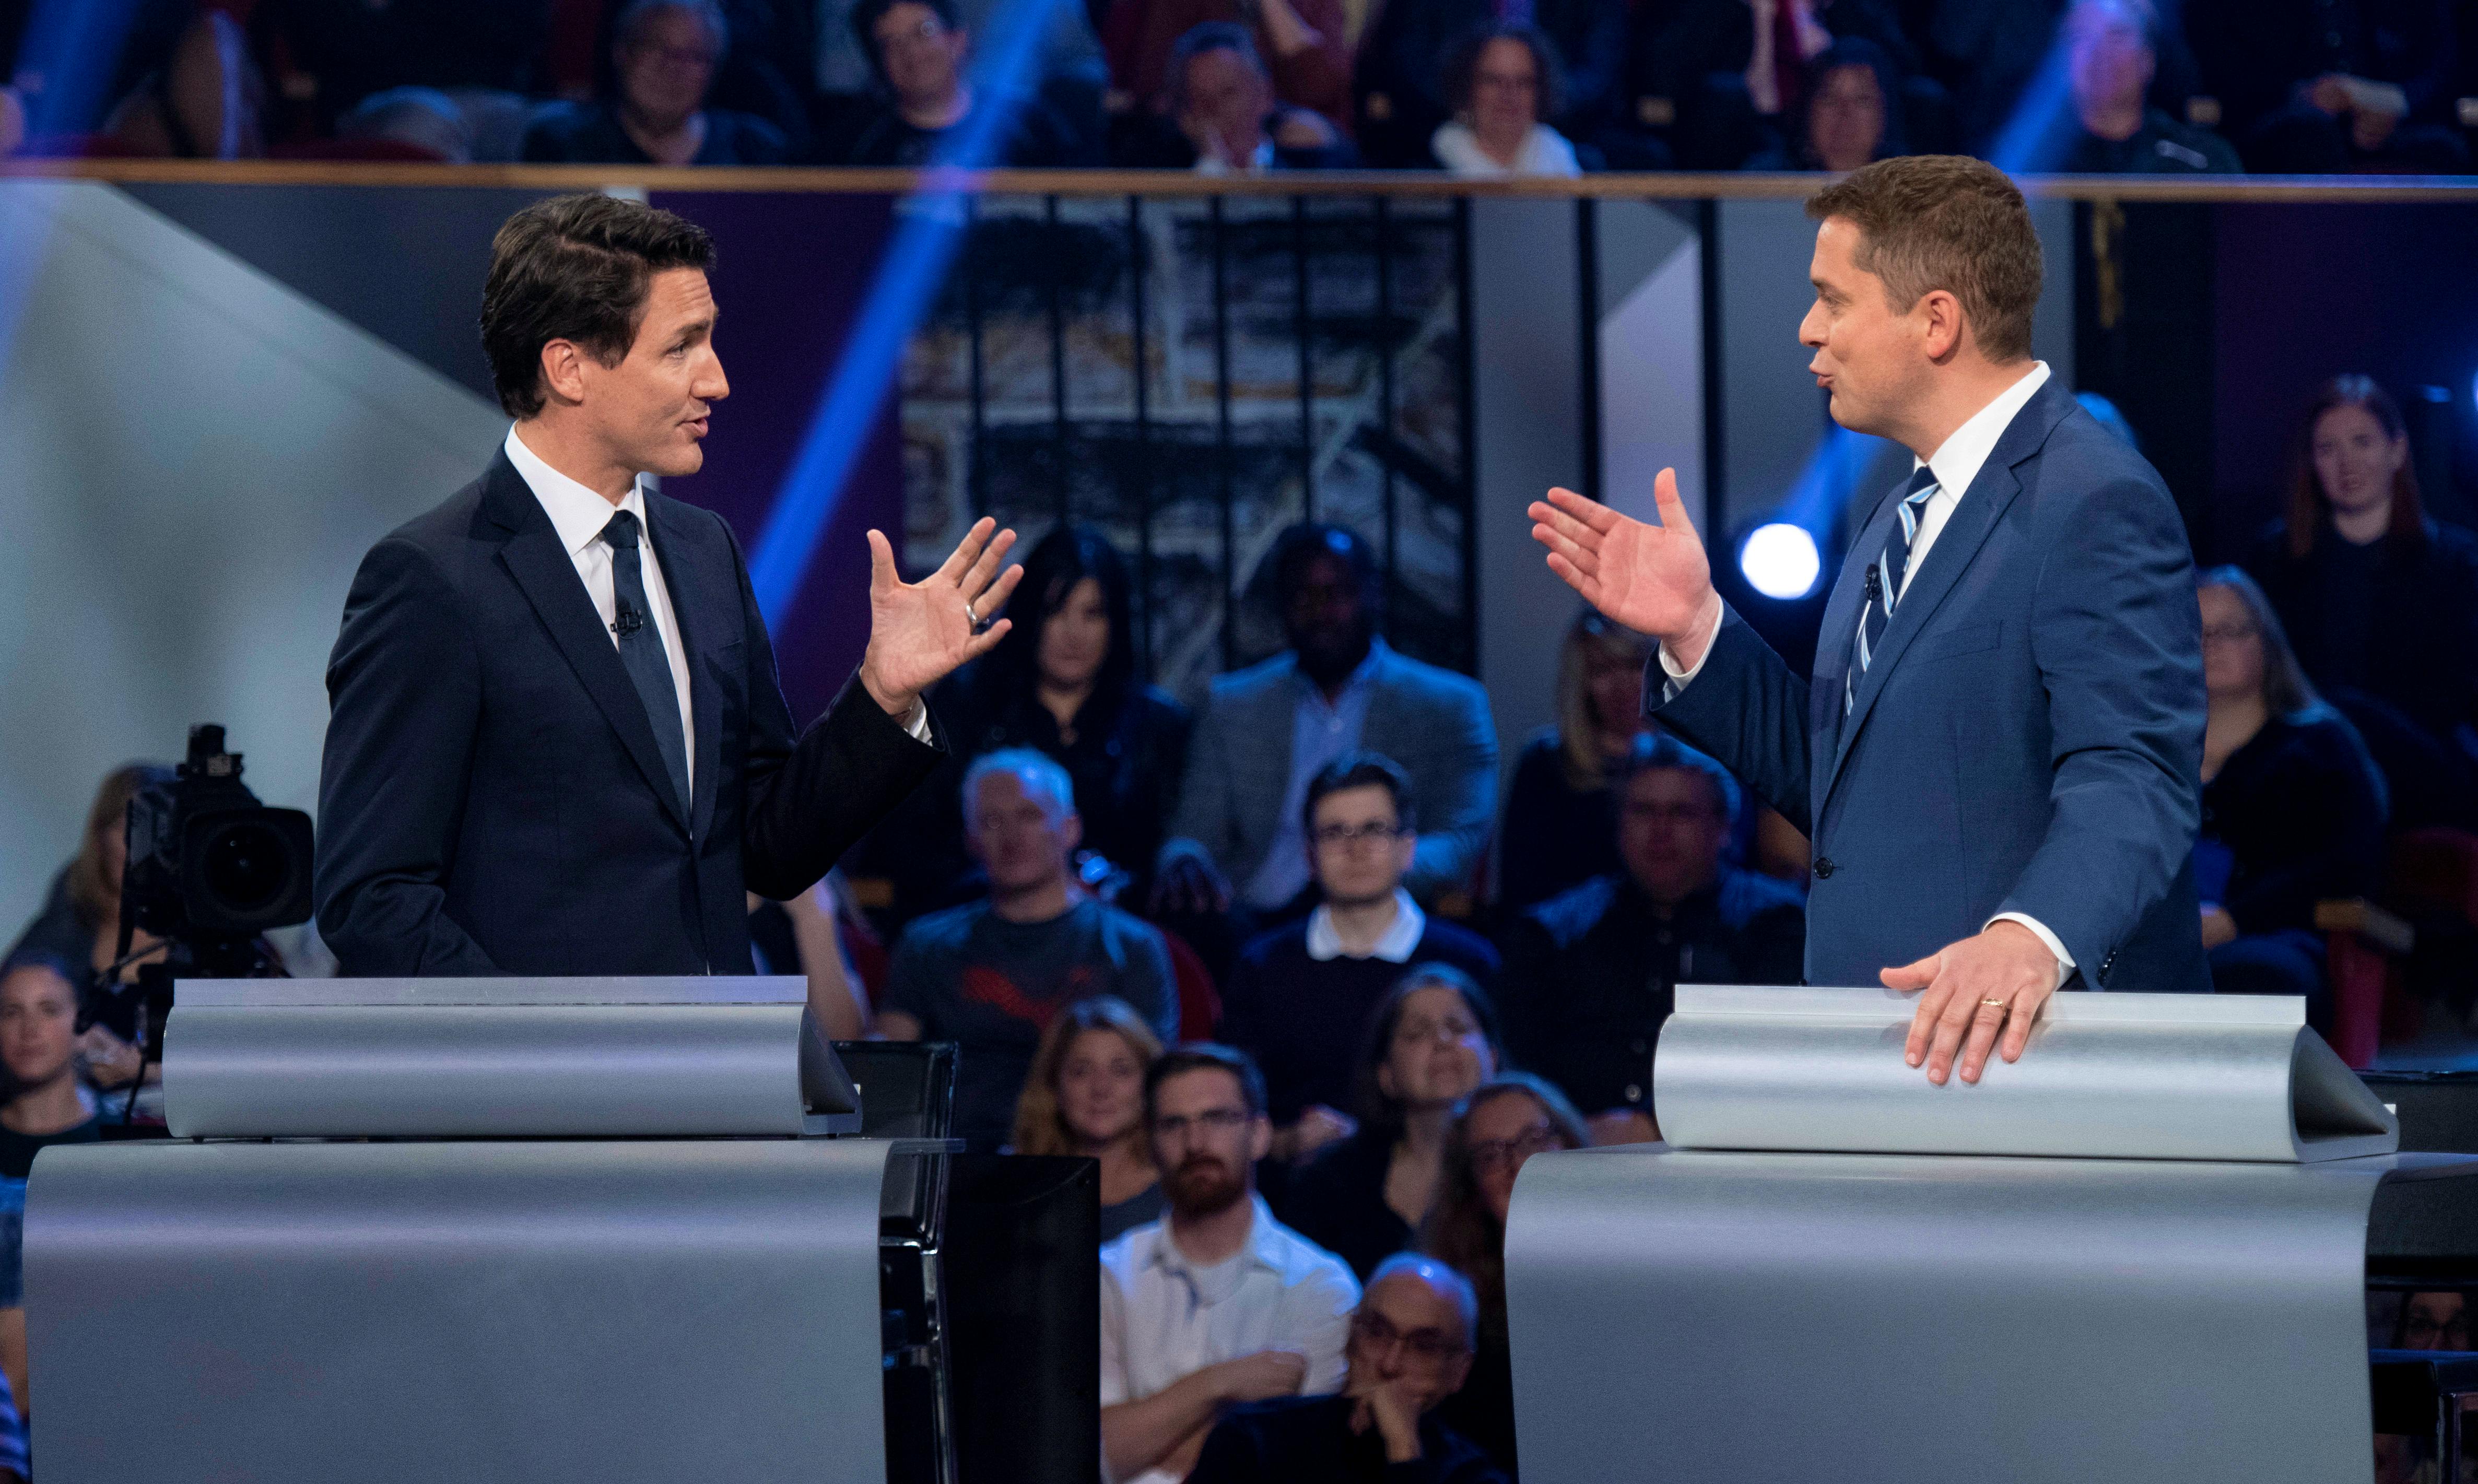 Conservative leader Andrew Scheer and Liberal leader Justin Trudeau gesture to each other as they both respond during the Federal leaders debate in Gatineau, Quebec, Canada October 7, 2019. — Justin Tang